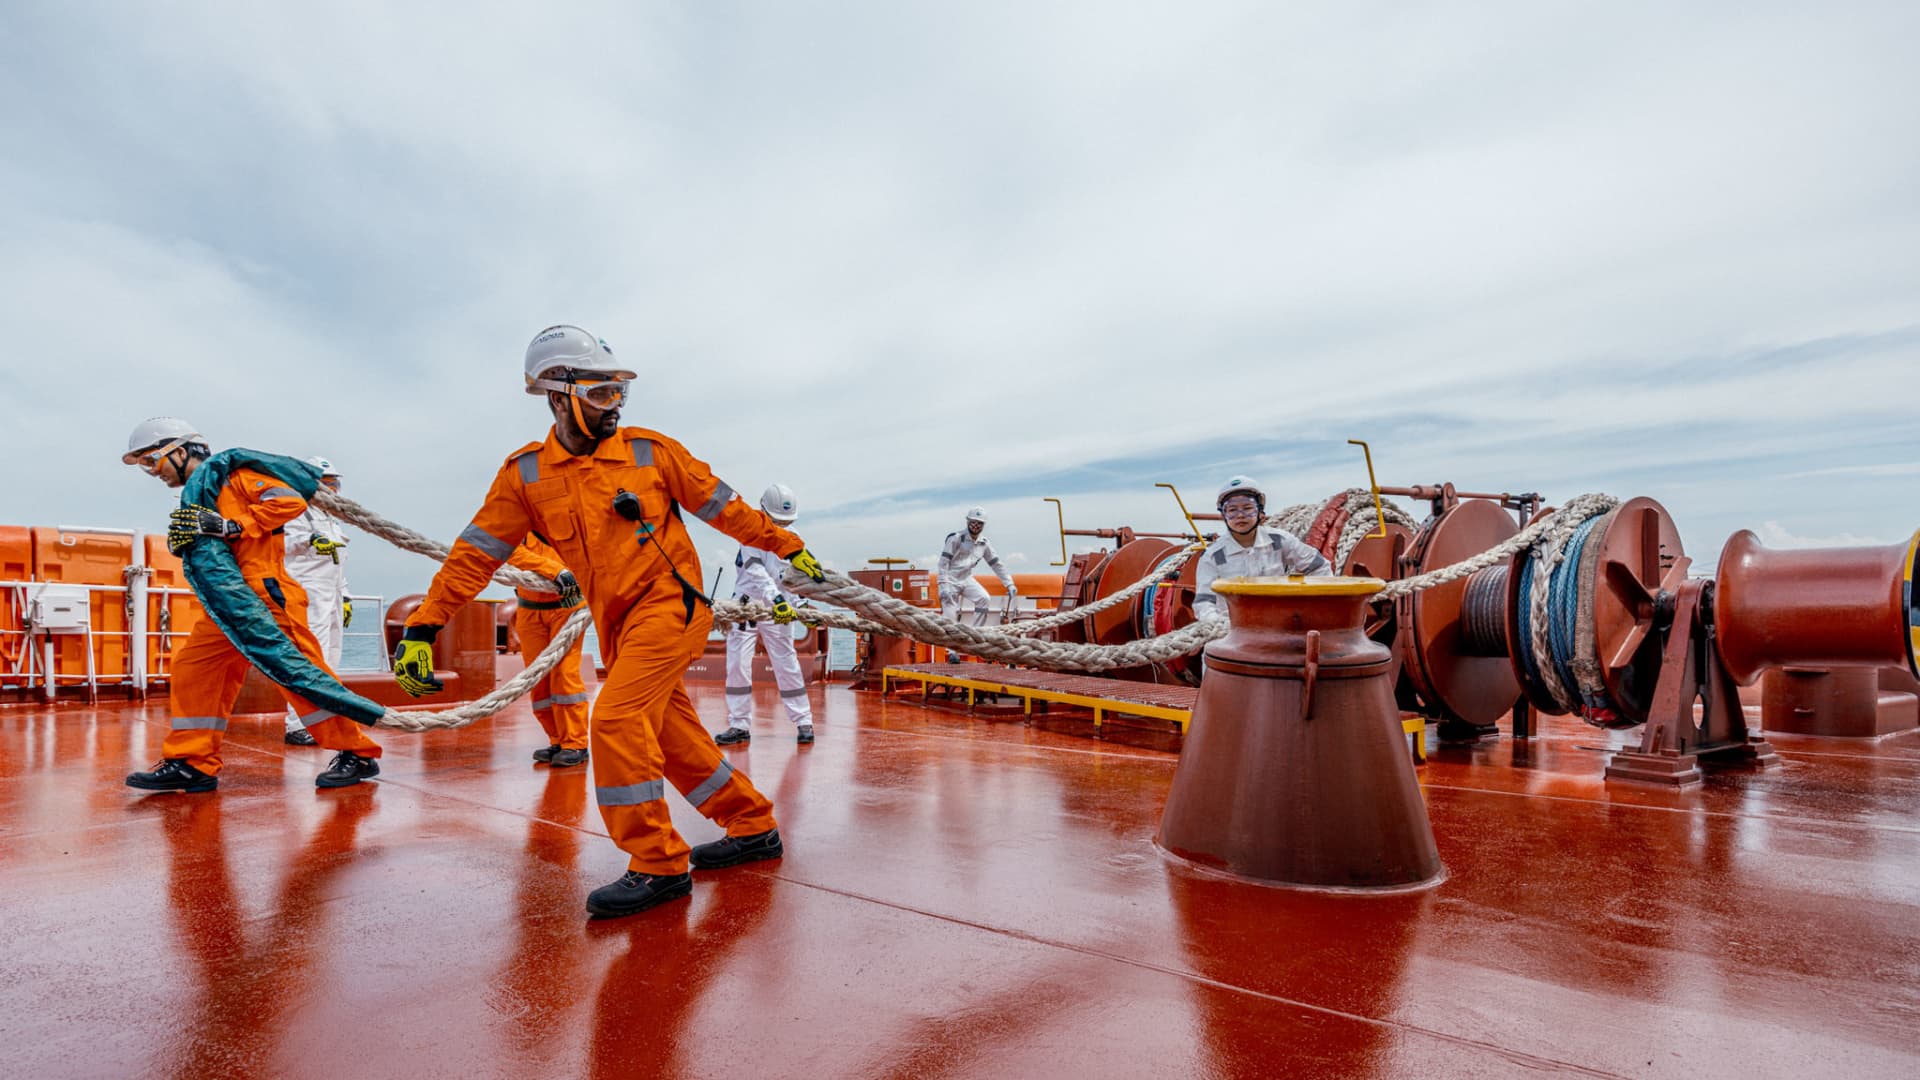 PlayStation, treasure hunts and natural wonders: What life is like onboard a giant oil tanker